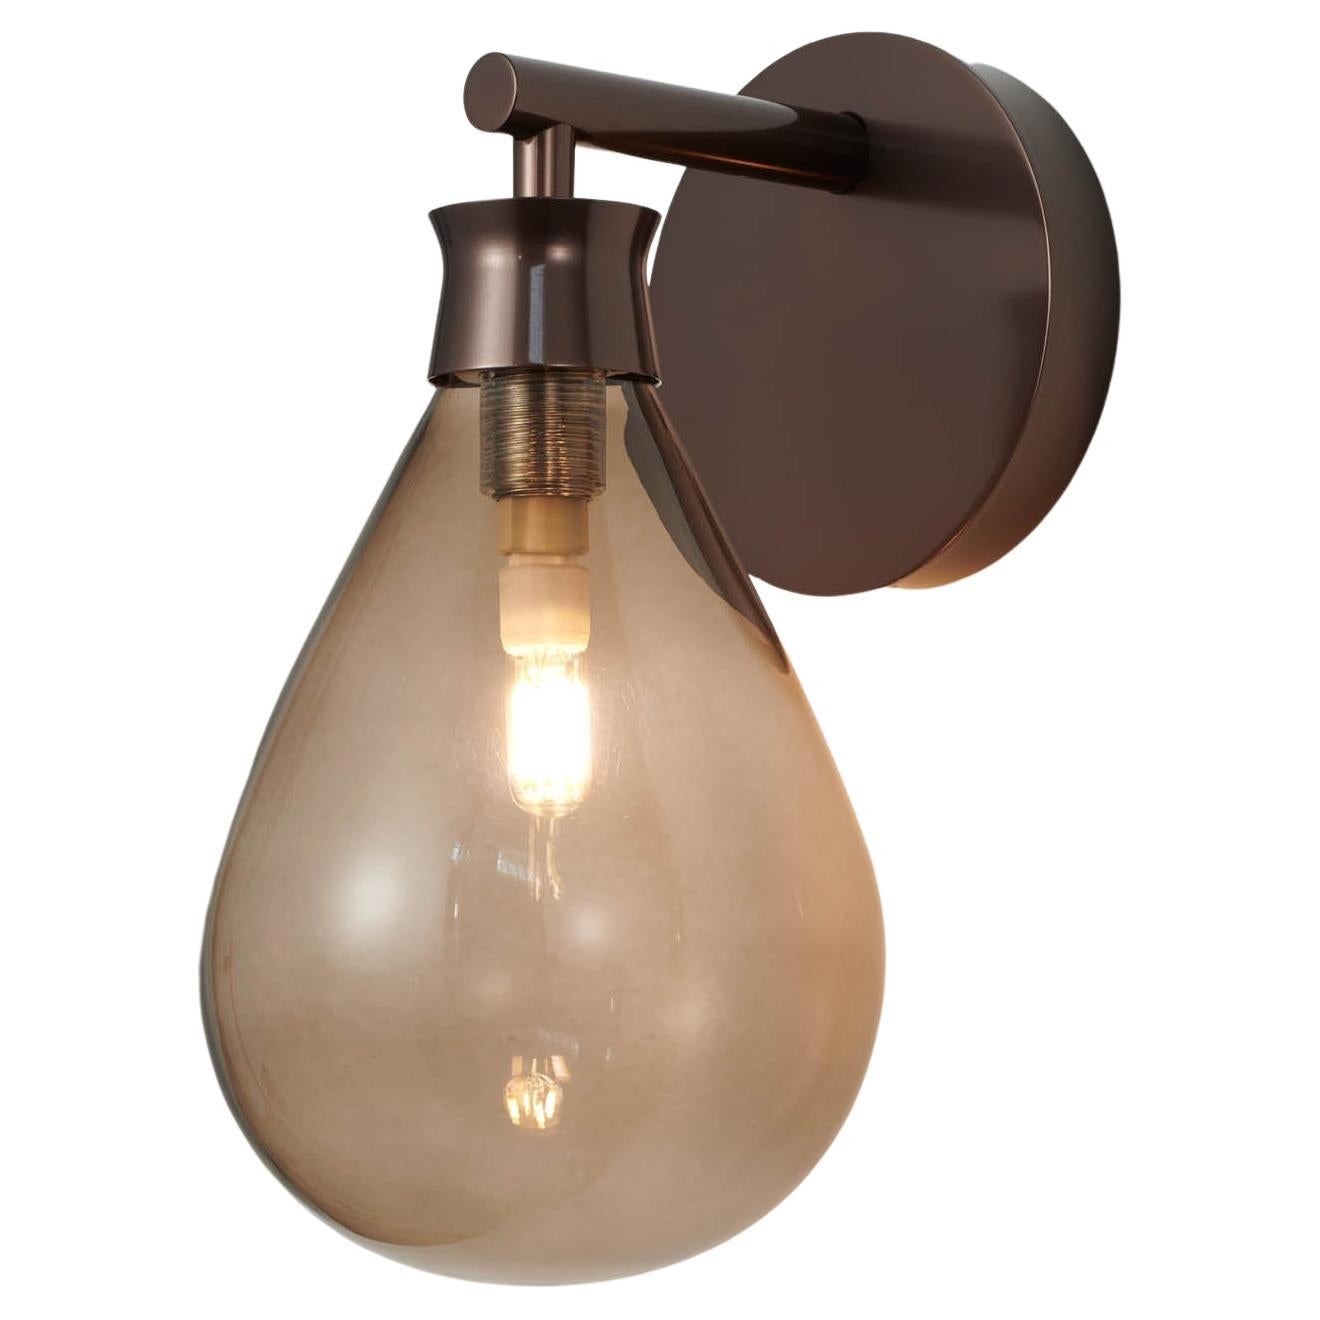 Cintola Wall Light in Satin Bronze with Bronze Handblown Glass Globe For Sale